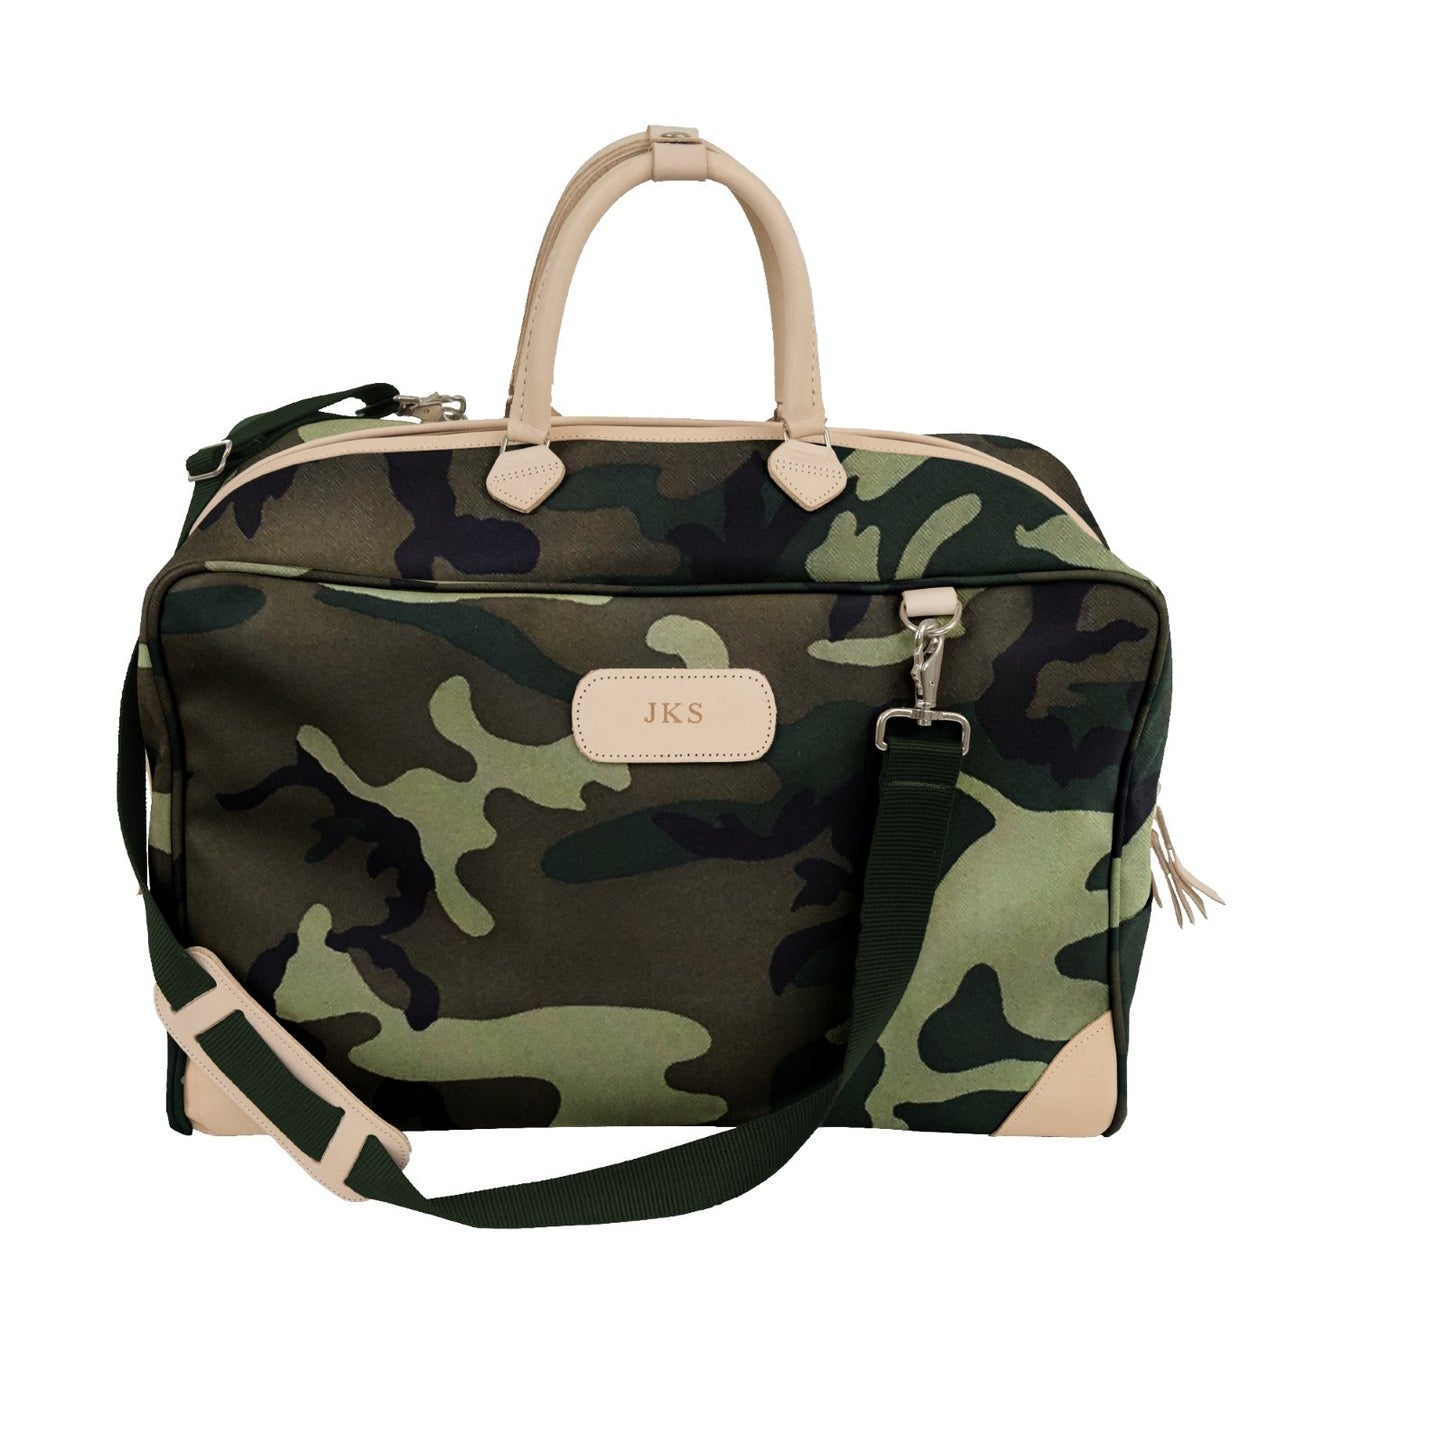 Coachman (Order in any color!) Travel Bags Jon Hart Classic Camo Coated Canvas  